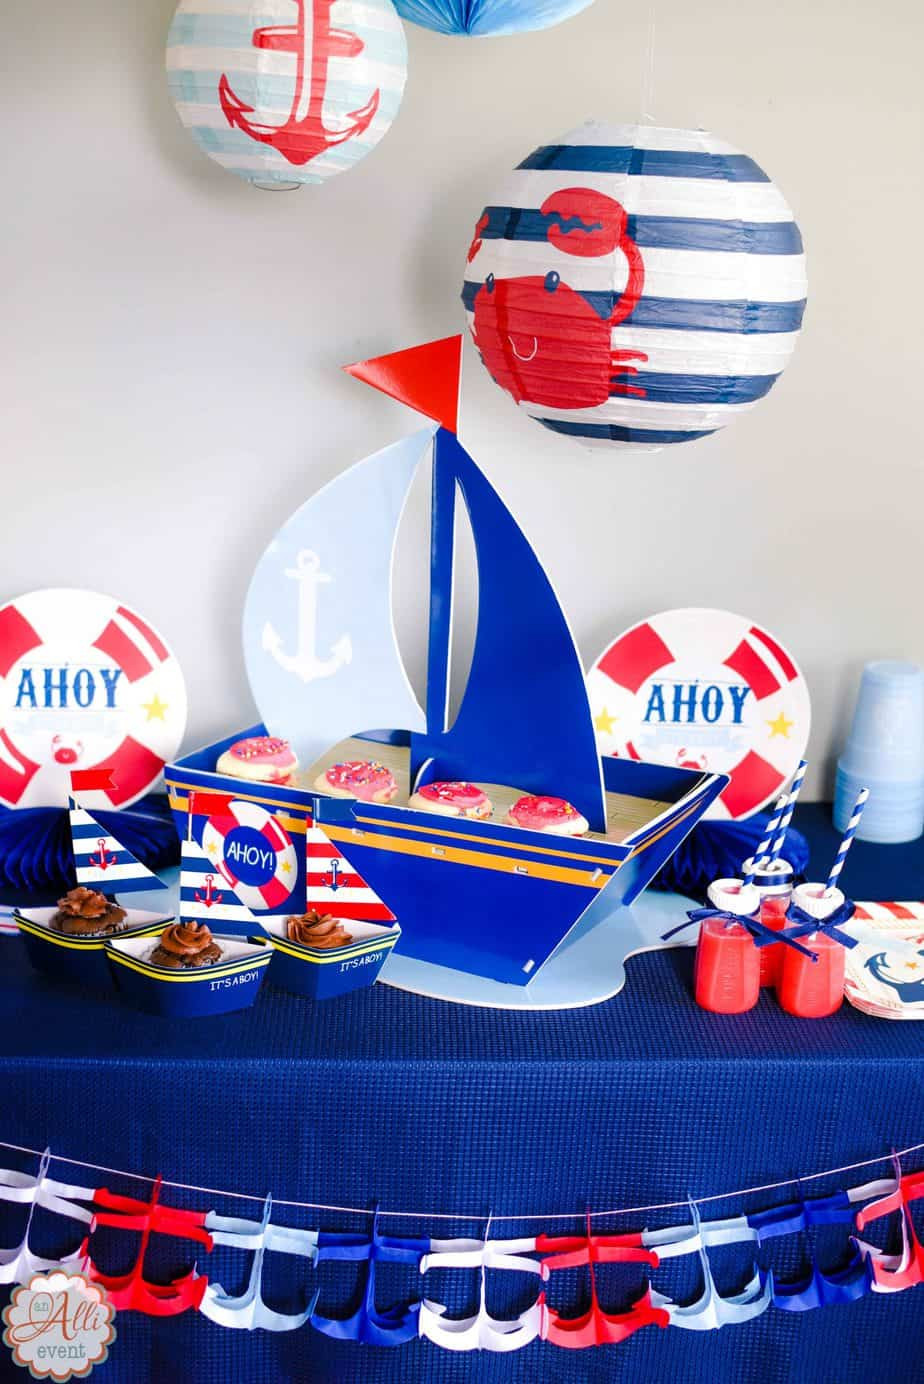 Nautical Theme Baby Shower Decor
 How to Host an Adorable Nautical Baby Shower An Alli Event